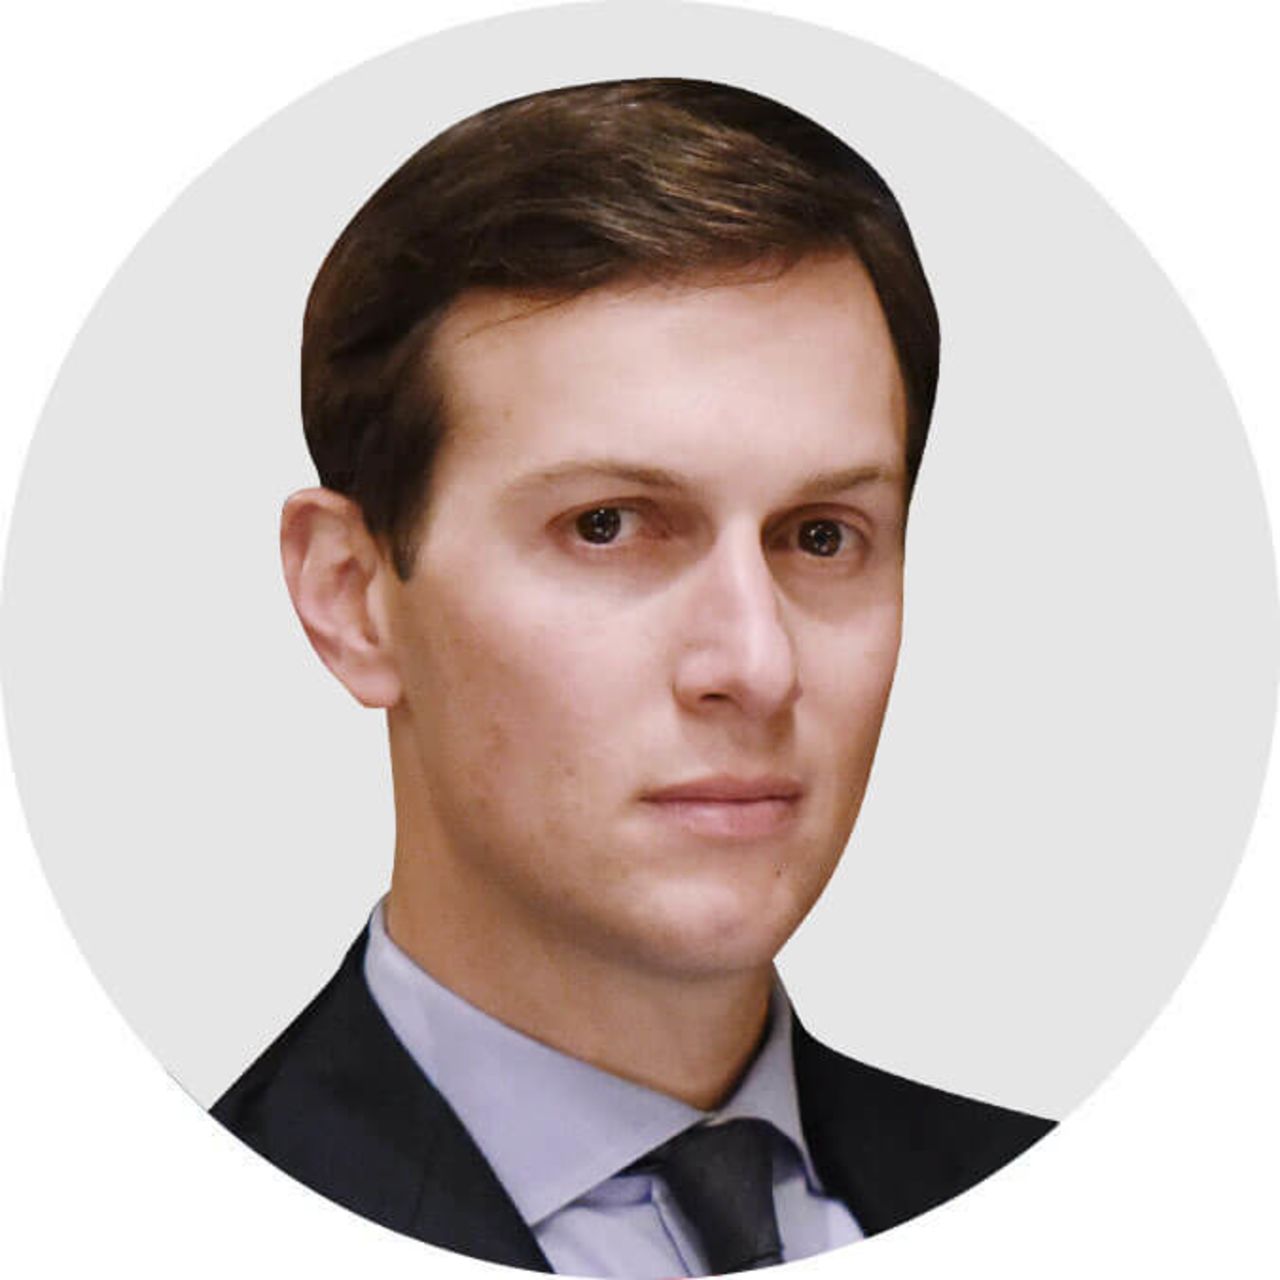 Additional contacts with Russians - (Jared Kushner)